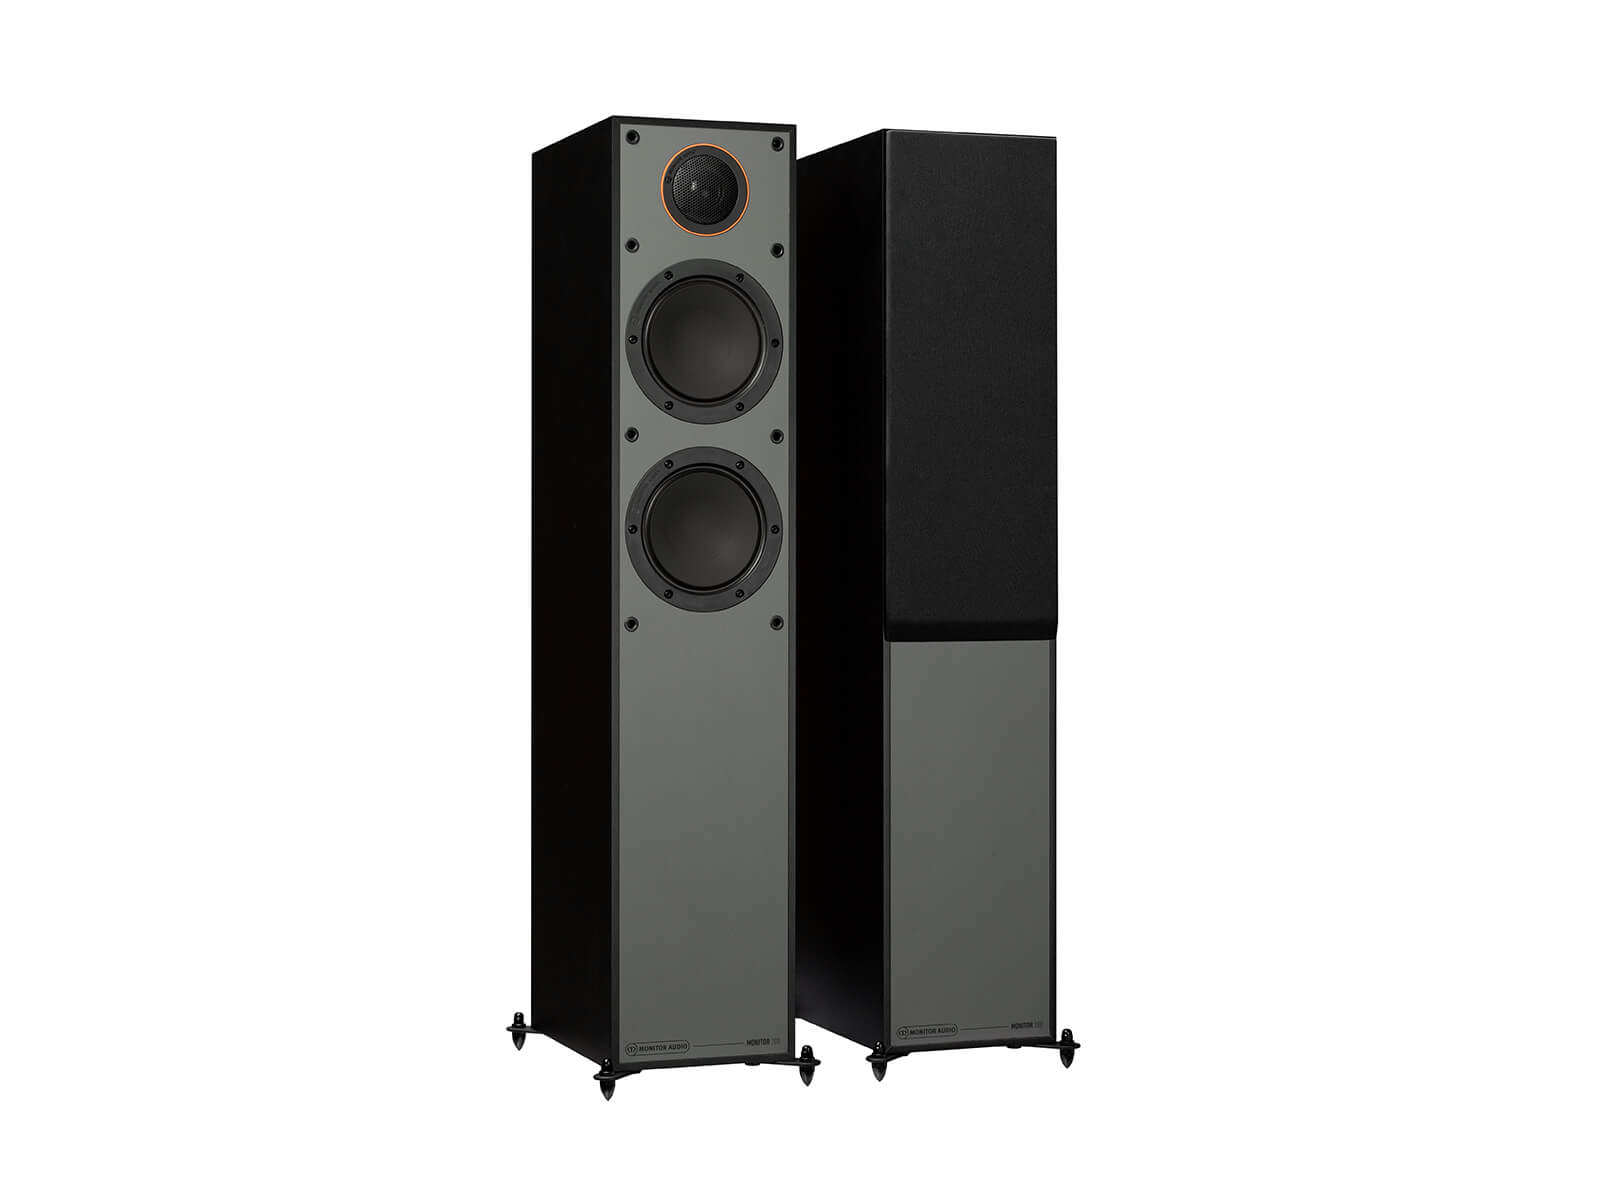 Monitor 200, floorstanding speakers, with and without grille in a black finish.